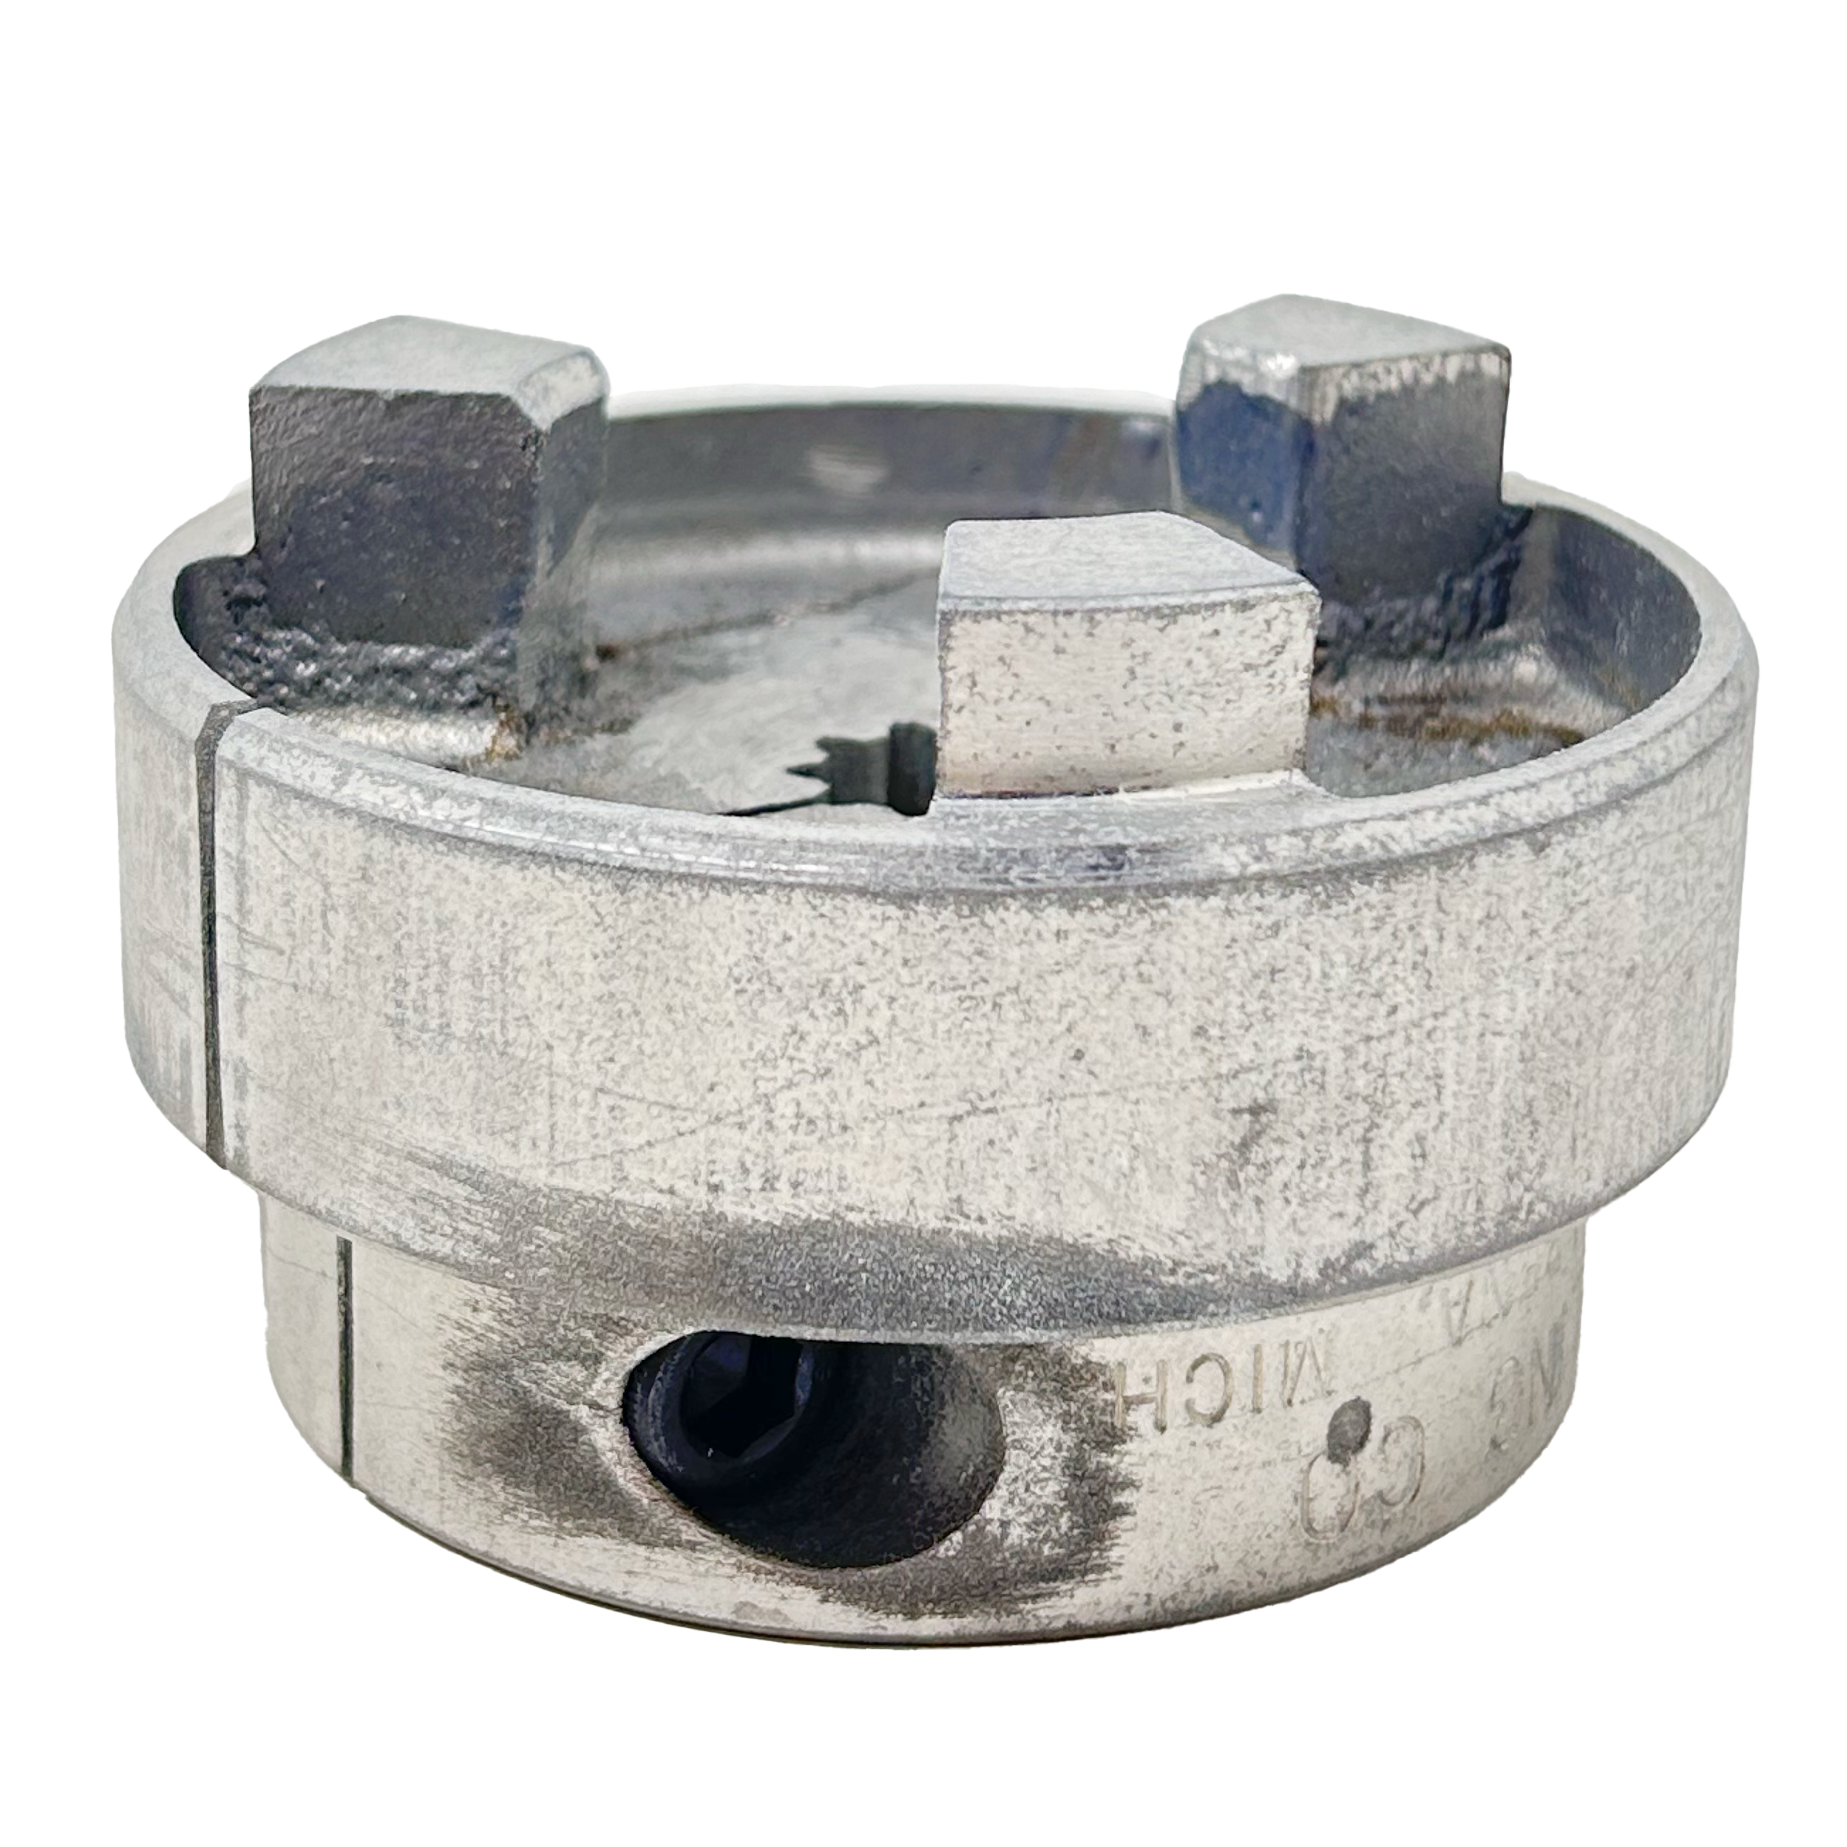 300 9T 16/32 : Magnaloy 300 HUB 9-TOOTH 16/32 SP/CLAMP, M300A0916C